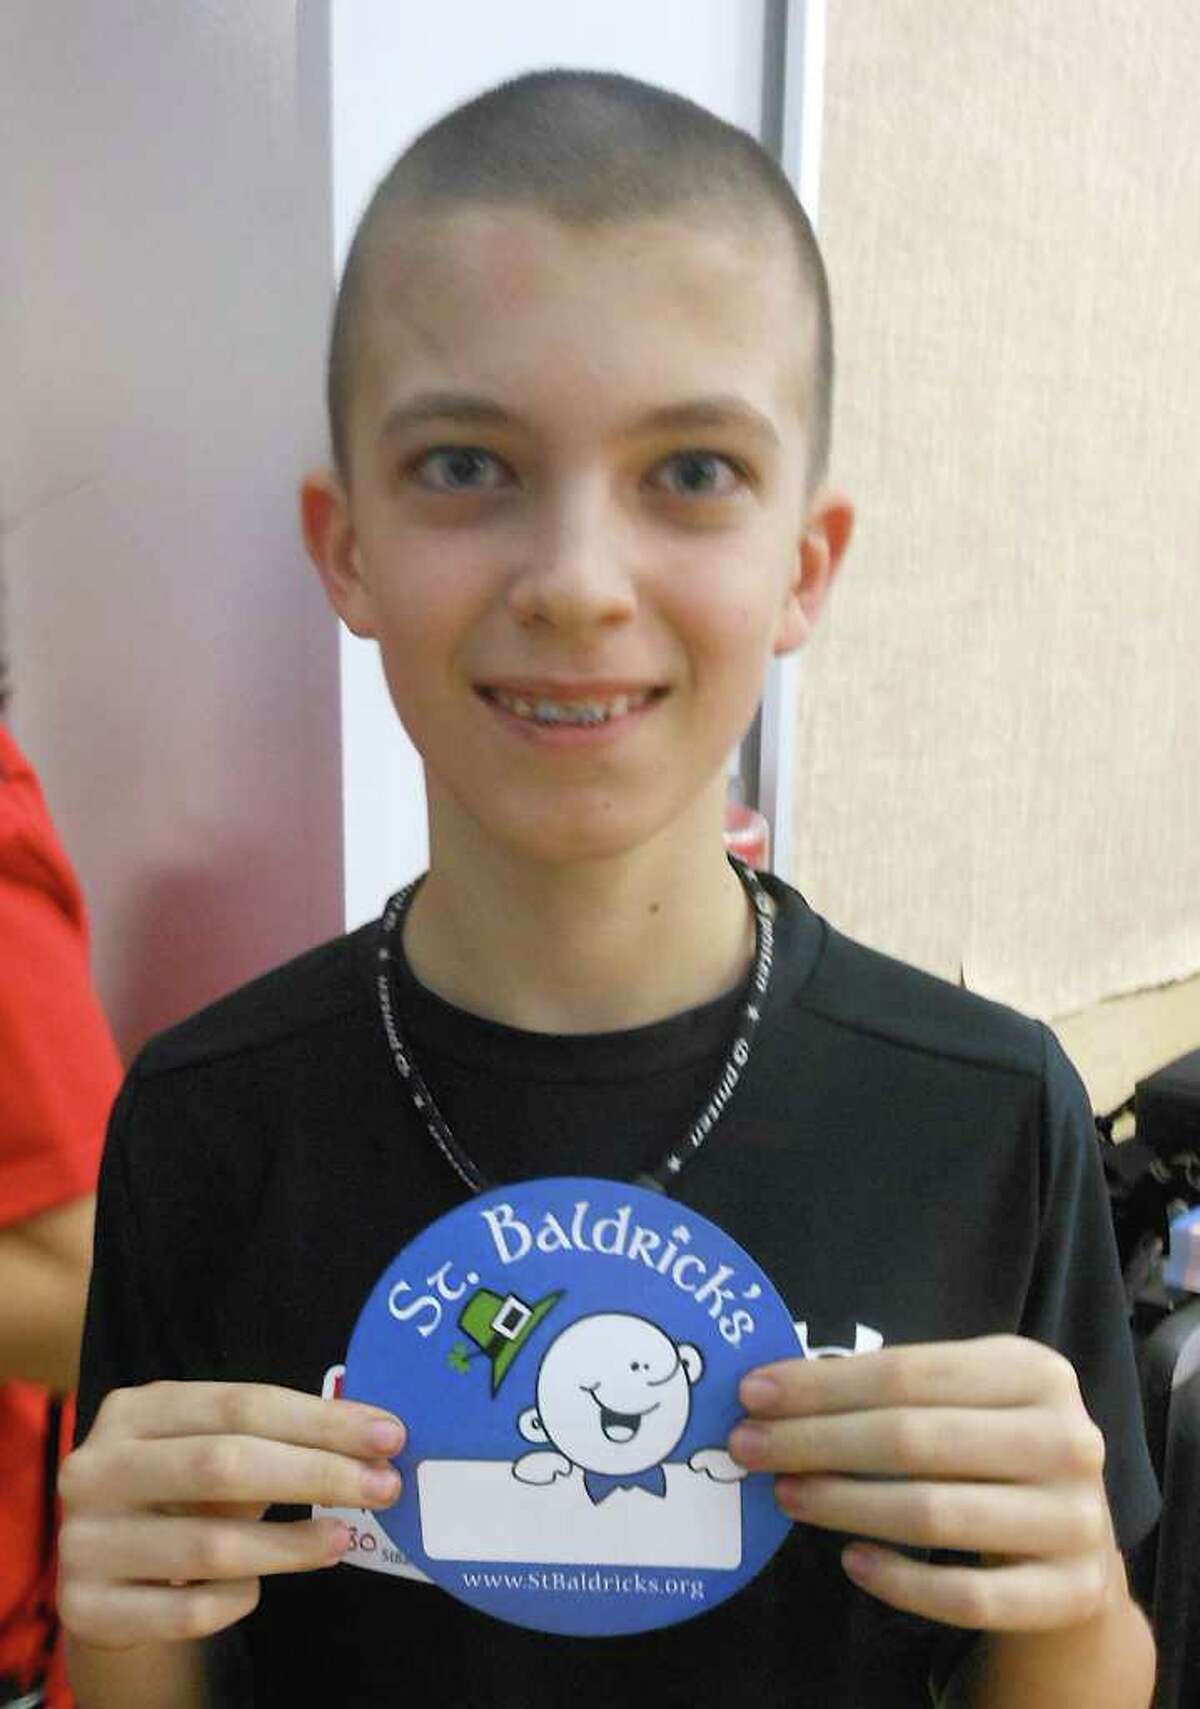 Ten-year-old Mark Handler, with his freshly shaven head Friday, was a former Osborn Hill classmate of Teddy Gerber's, who lost his battle with cancer in 2010.